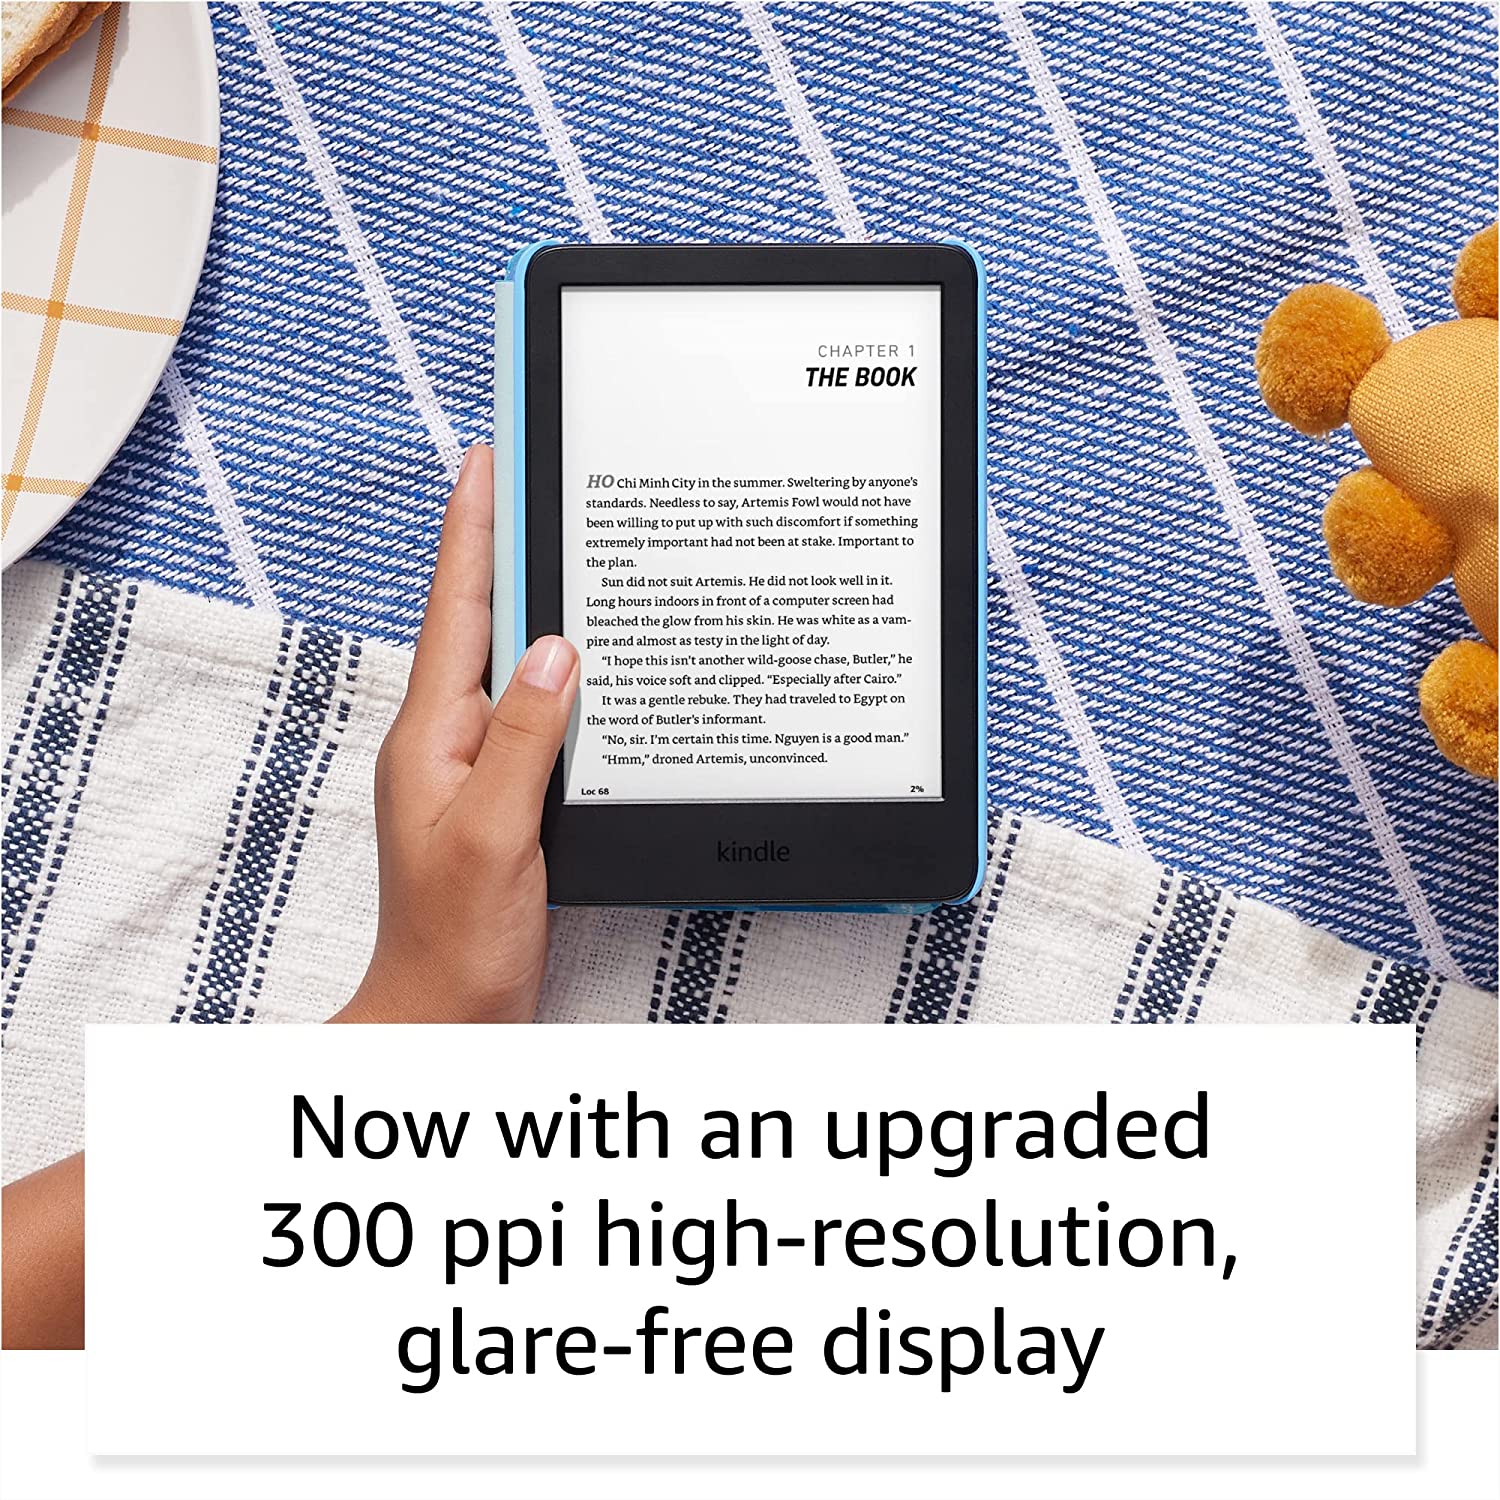 Kindle – The lightest and most compact Kindle, with extended battery  life, adjustable front light, and 16 GB storage – Denim